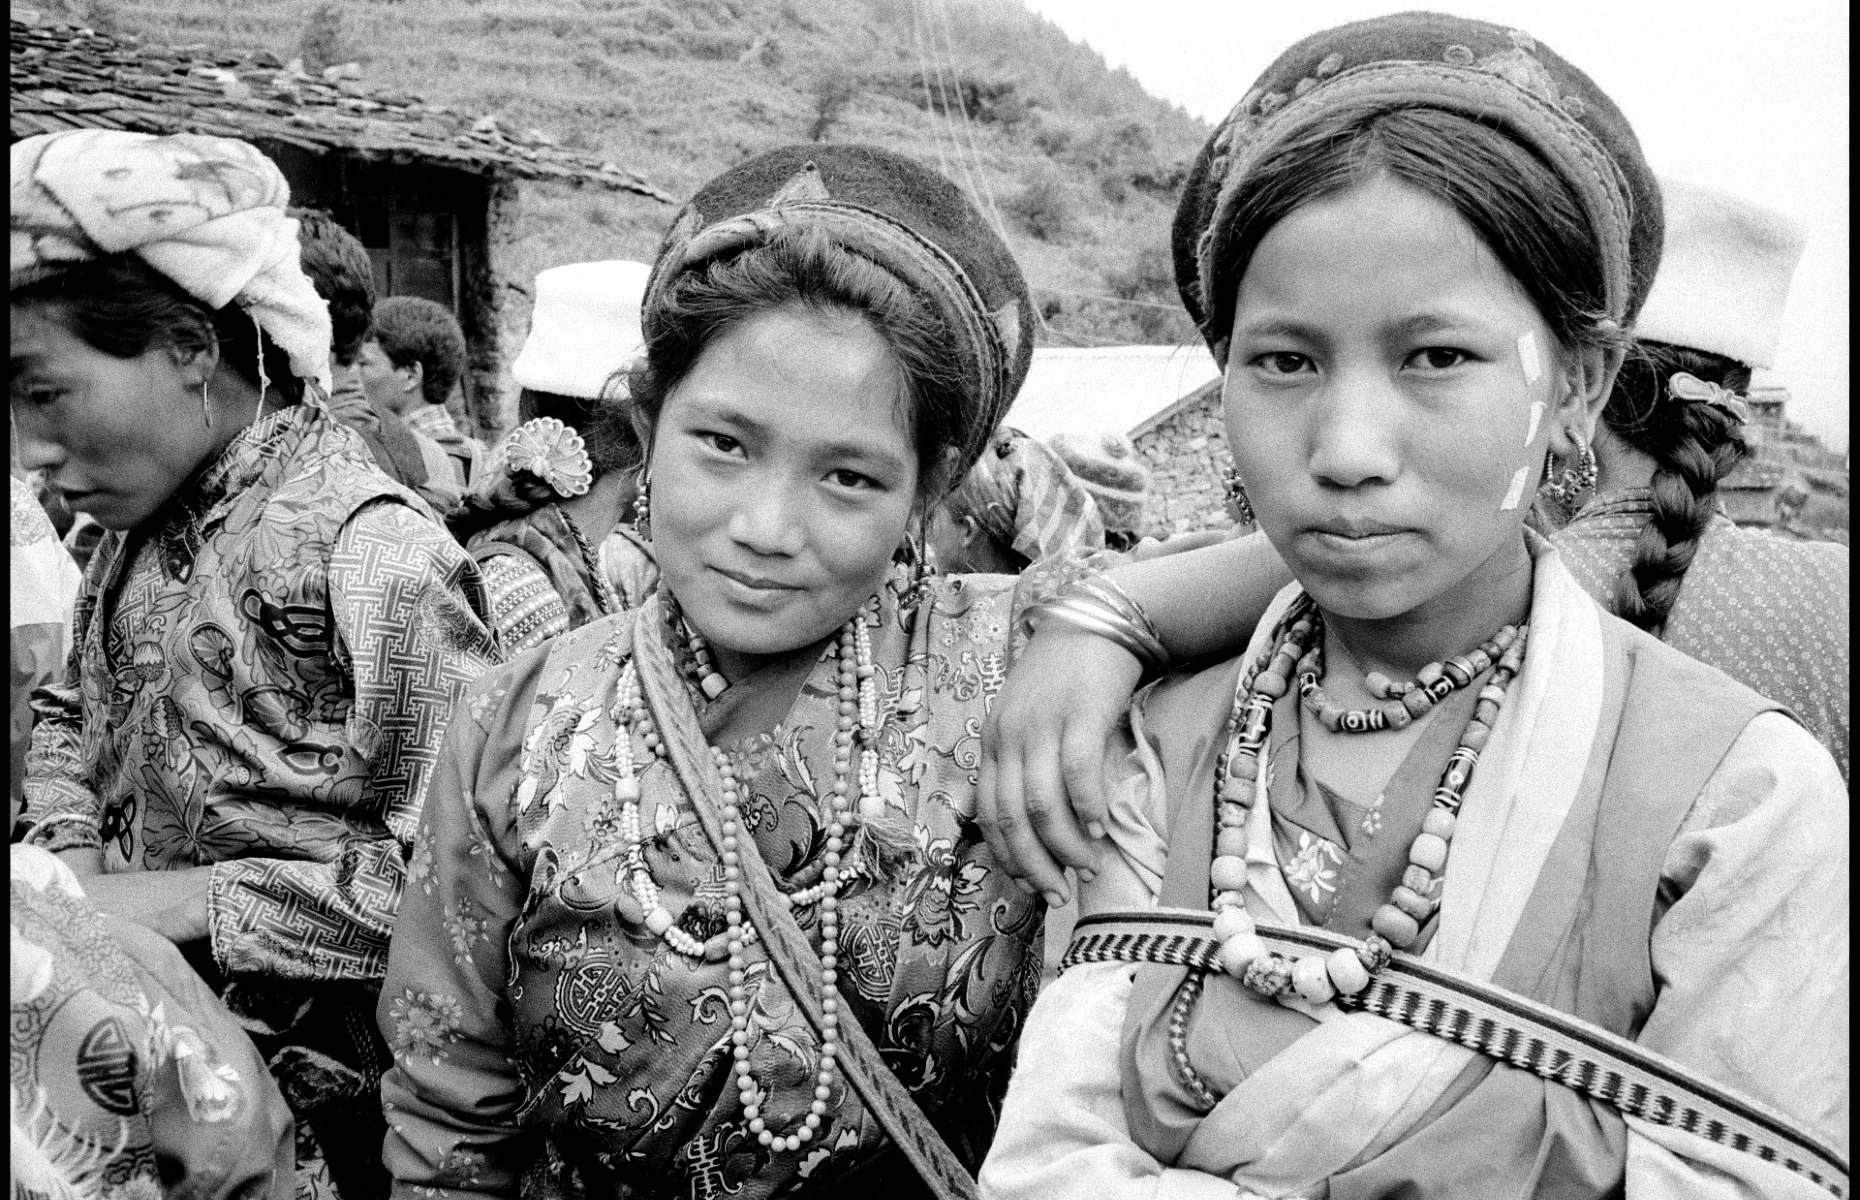 Nowadays, the mountain range is populated by a range of different groups. Broadly speaking, Tibetans and Tibeto-Burman speakers live in the northernmost section, Indo-European speakers are found in the central and southernmost sections. Pictured here are children from the Tamang group, whose population is thought to number 690,000.